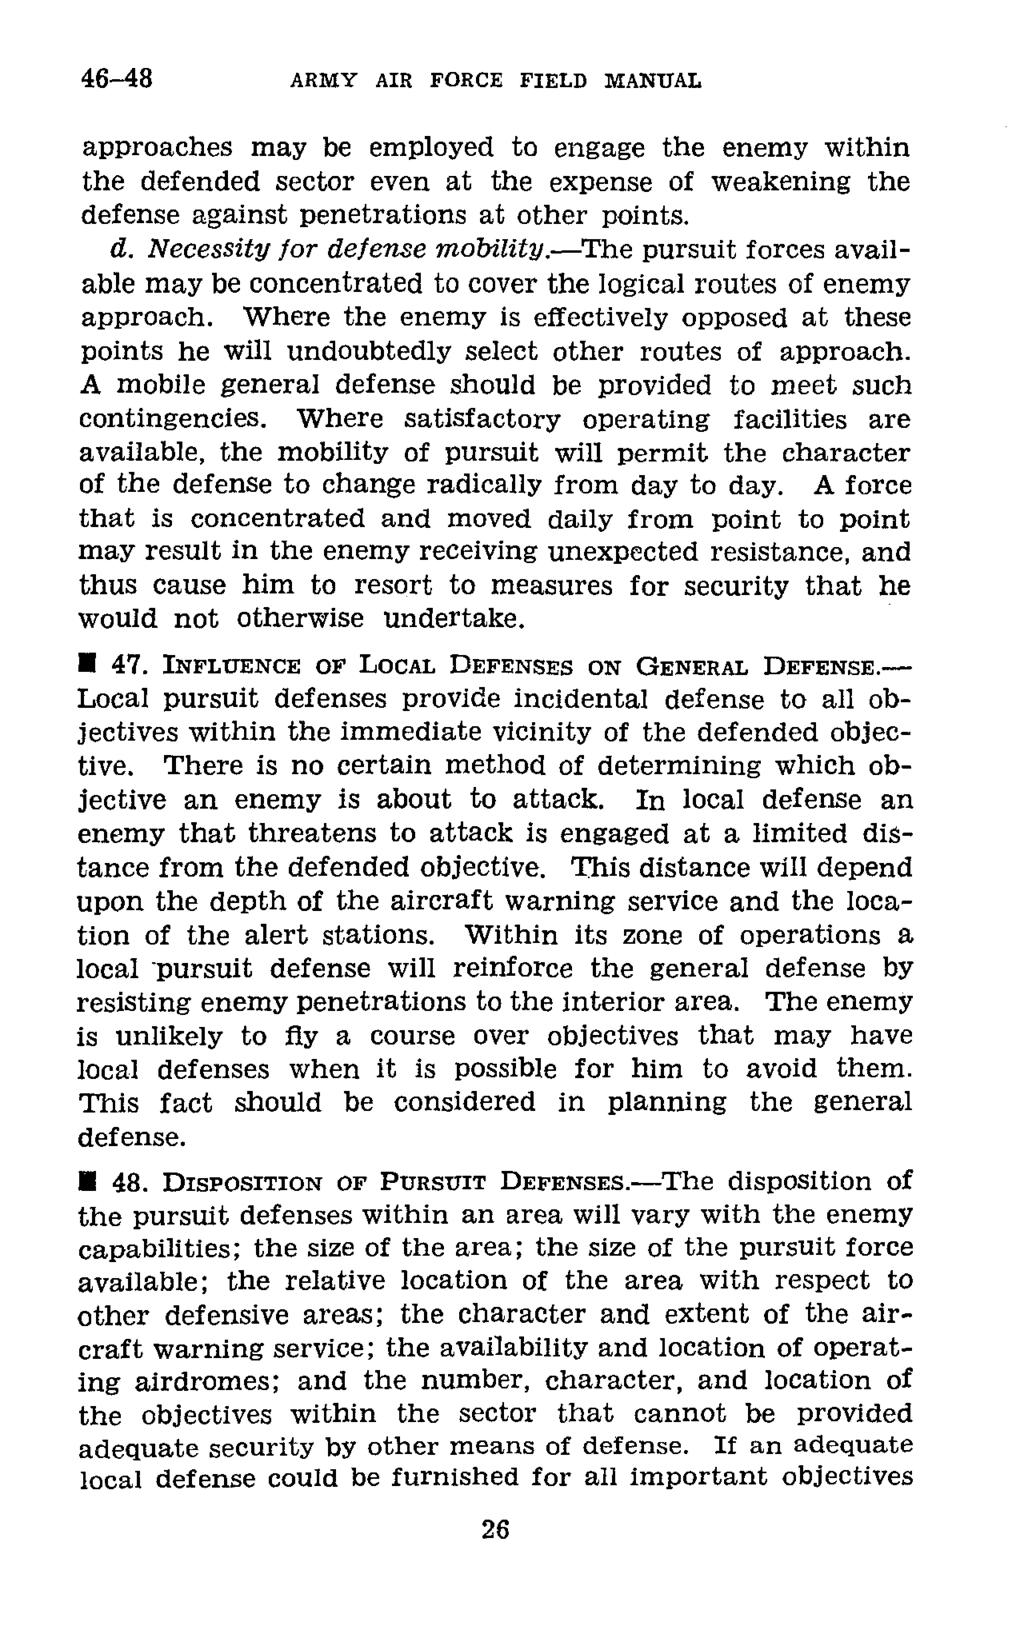 46-48 ARMY AIR FORCE FIELD MANUAL approaches may be employed to engage the enemy within the defended sector even at the expense of weakening the defense against penetrations at other points. d. Necessity for defense mobility.